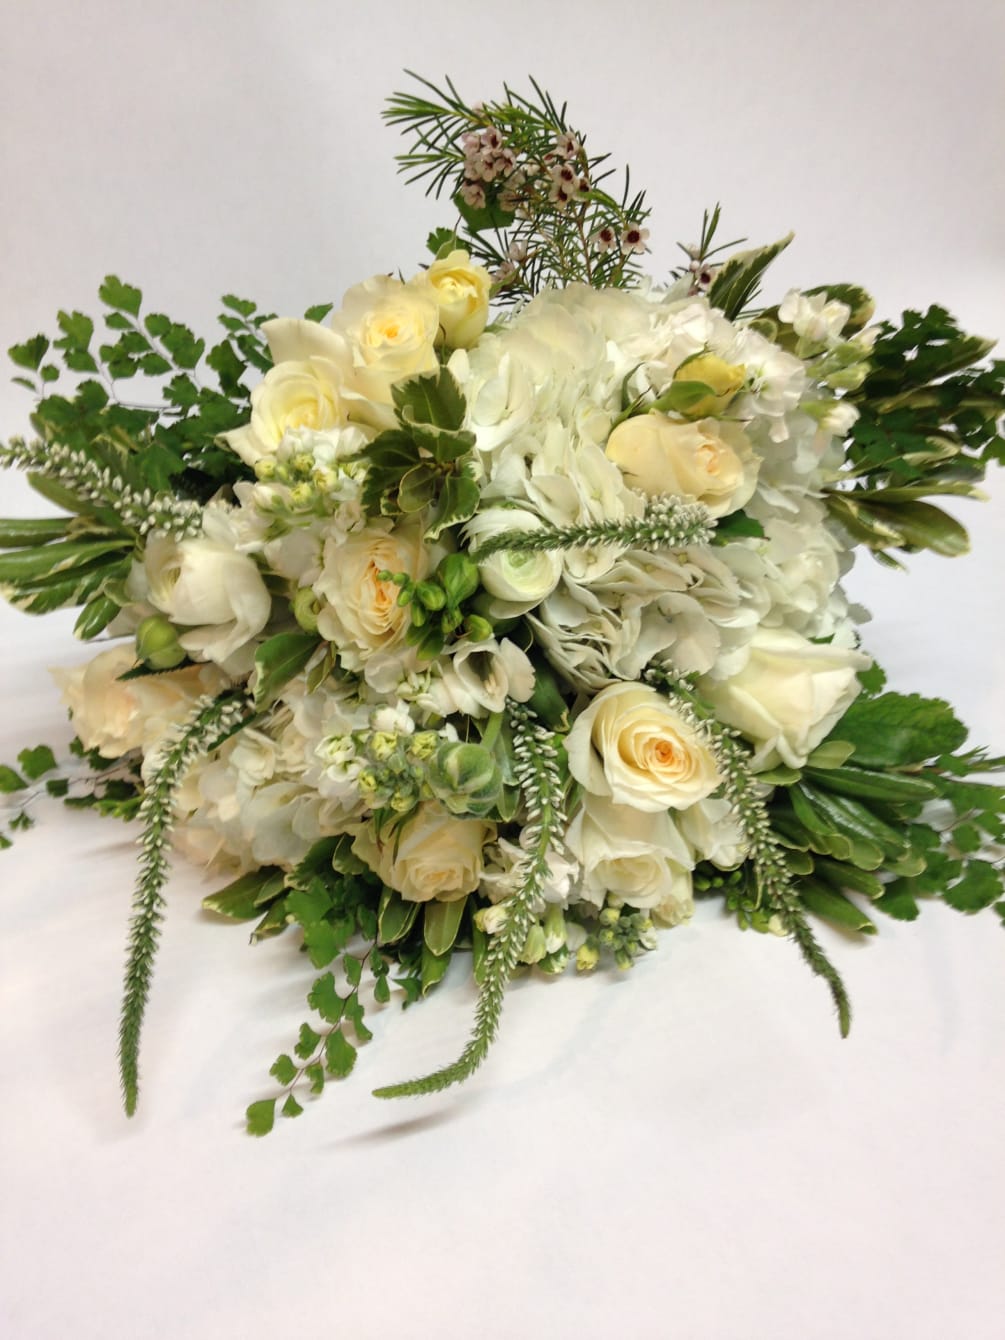 This lush and fragrant bridal bouquet includes white garden roses, stock, veronica